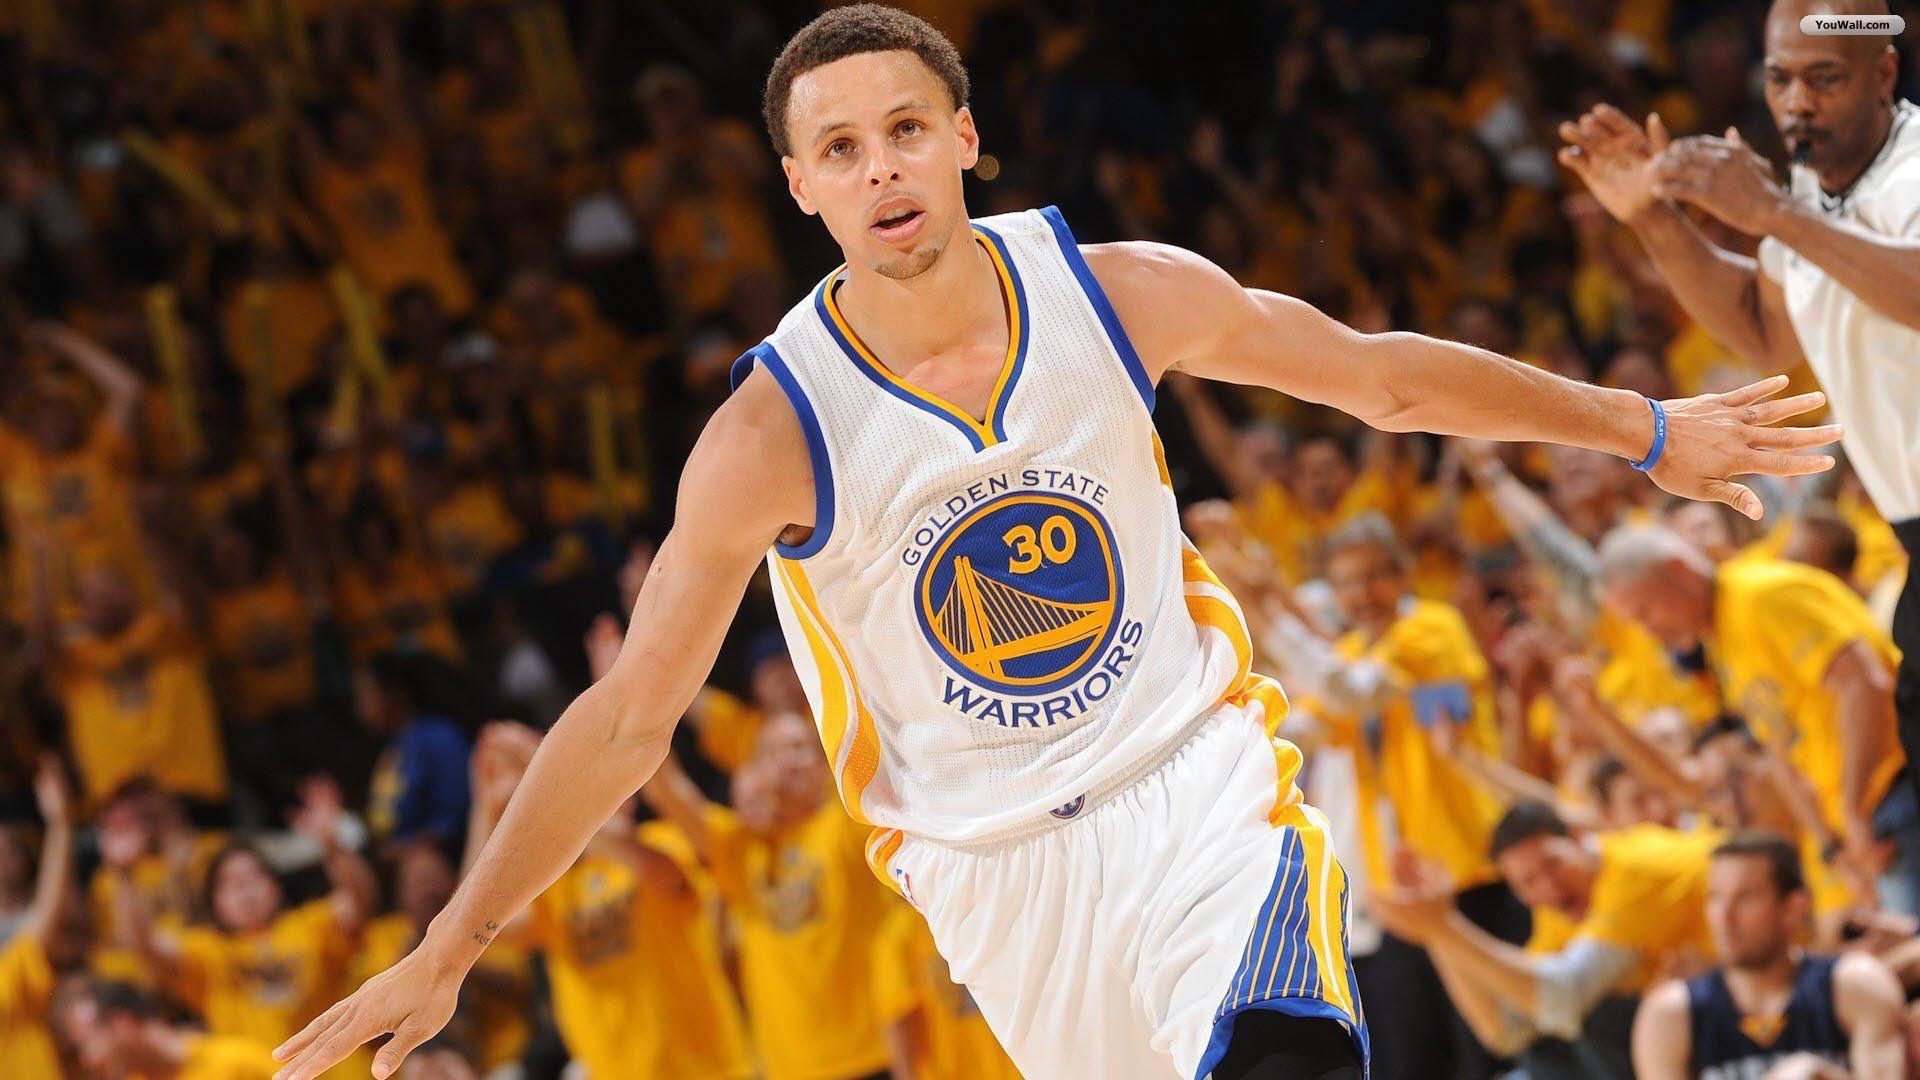 Stephen Curry Wallpaper HD free download